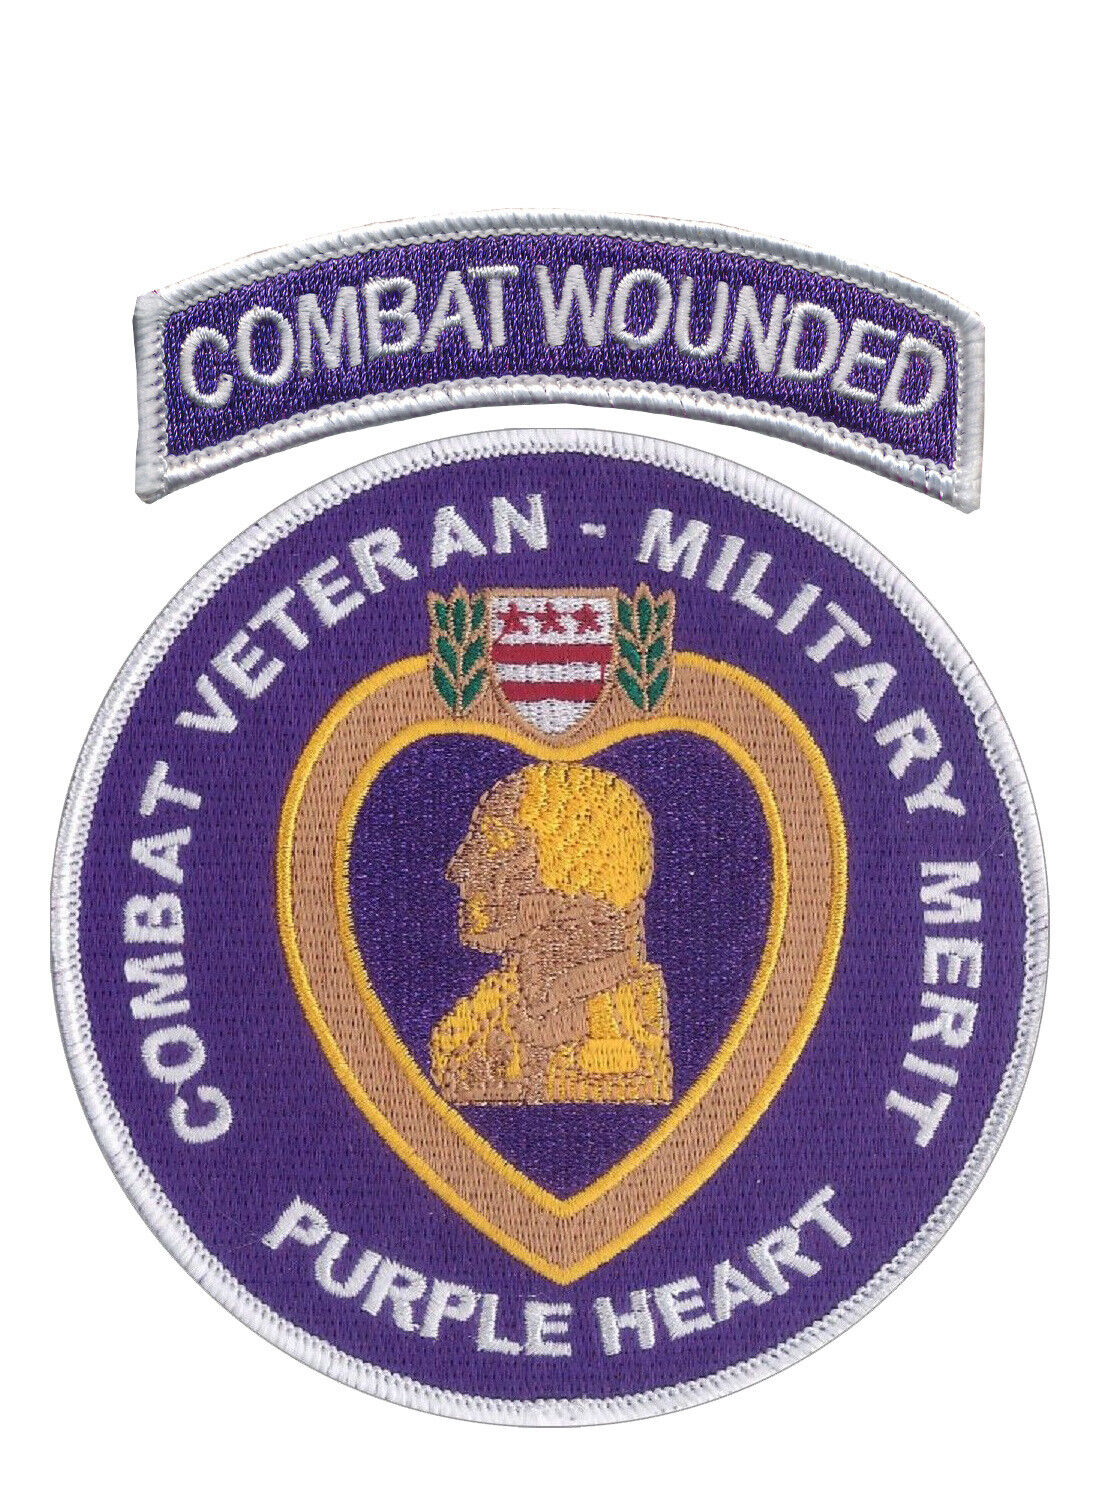 Combat Wounded Military Merit Embroidered Patch - COMBAT WOUNDED - US Army- USMC